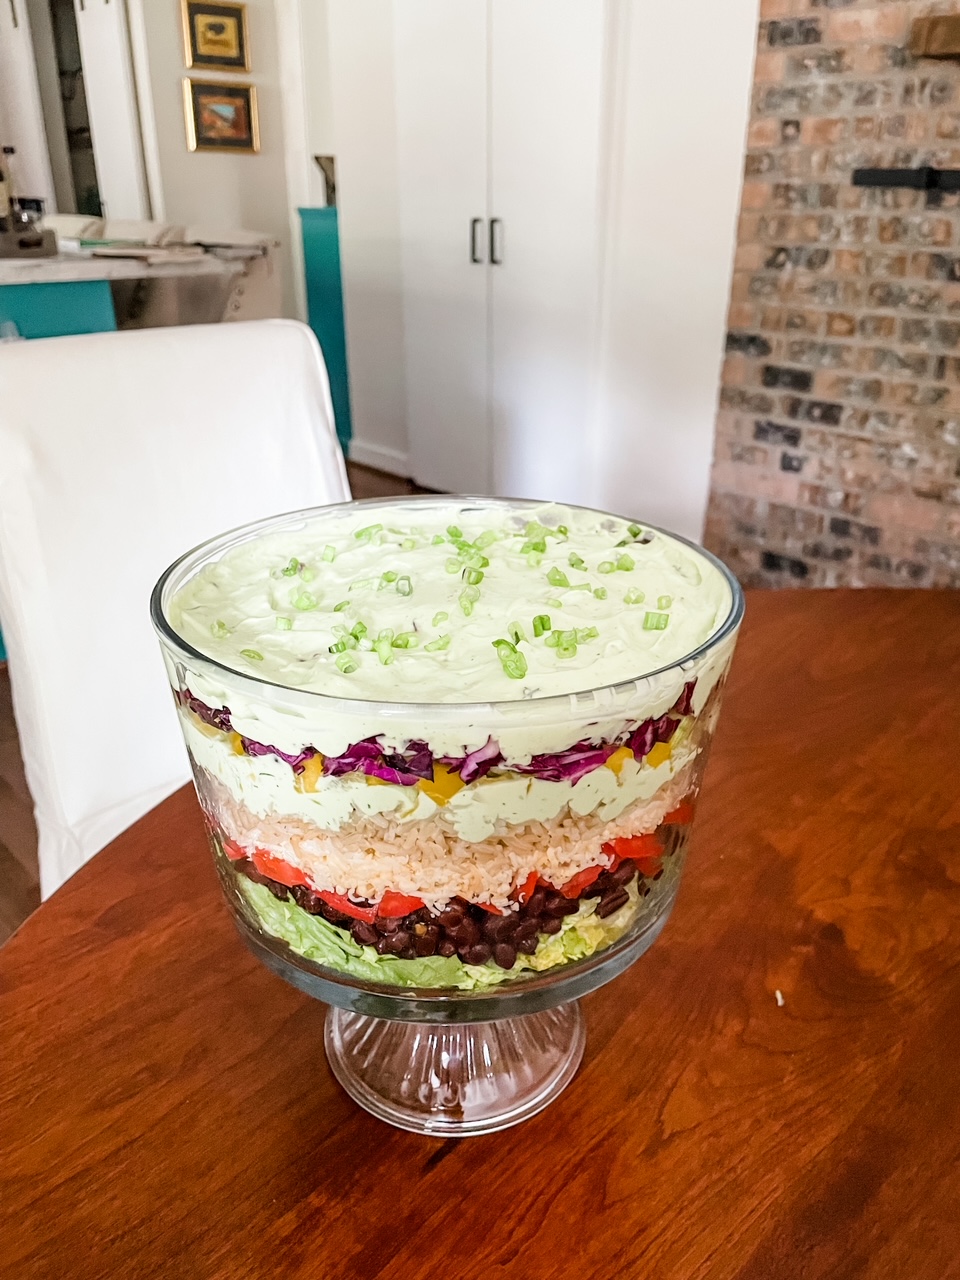 The Vegetarian Layered Salad with Avocado and Lime Dressing served in a trifle dish